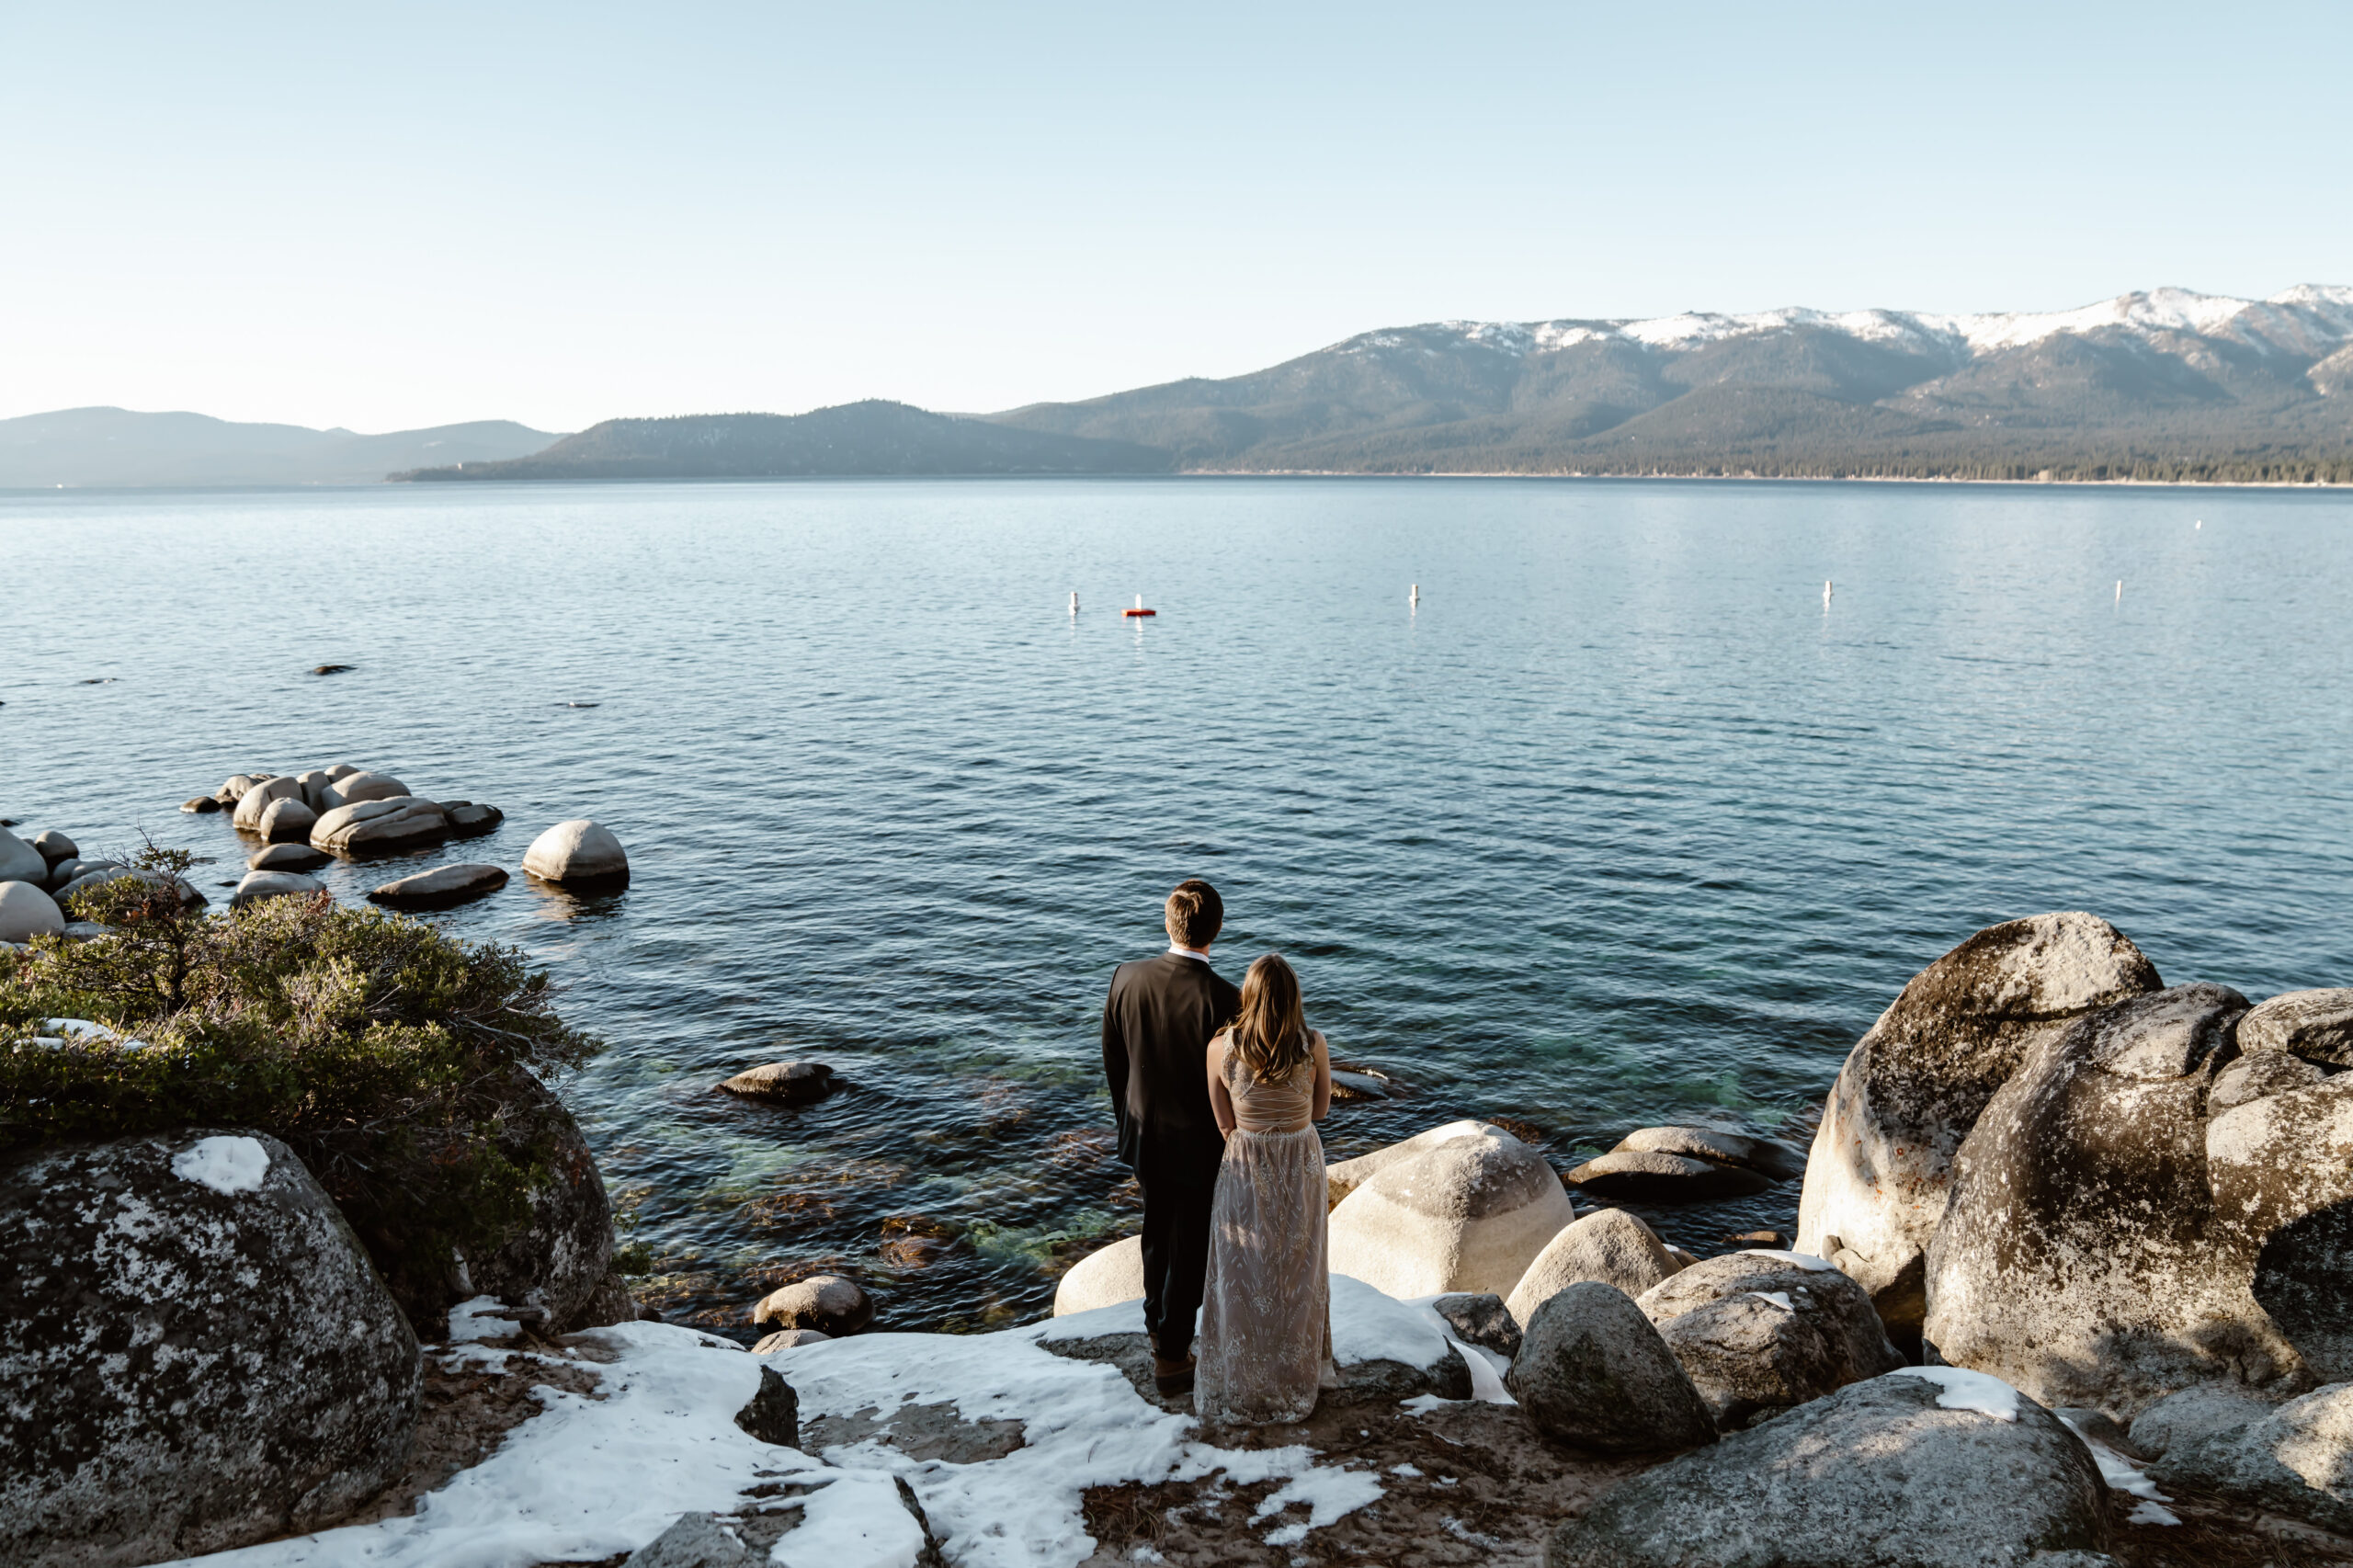 A bride and groom looking out onto Lake Tahoe standing in snowy rocks for their elopement day